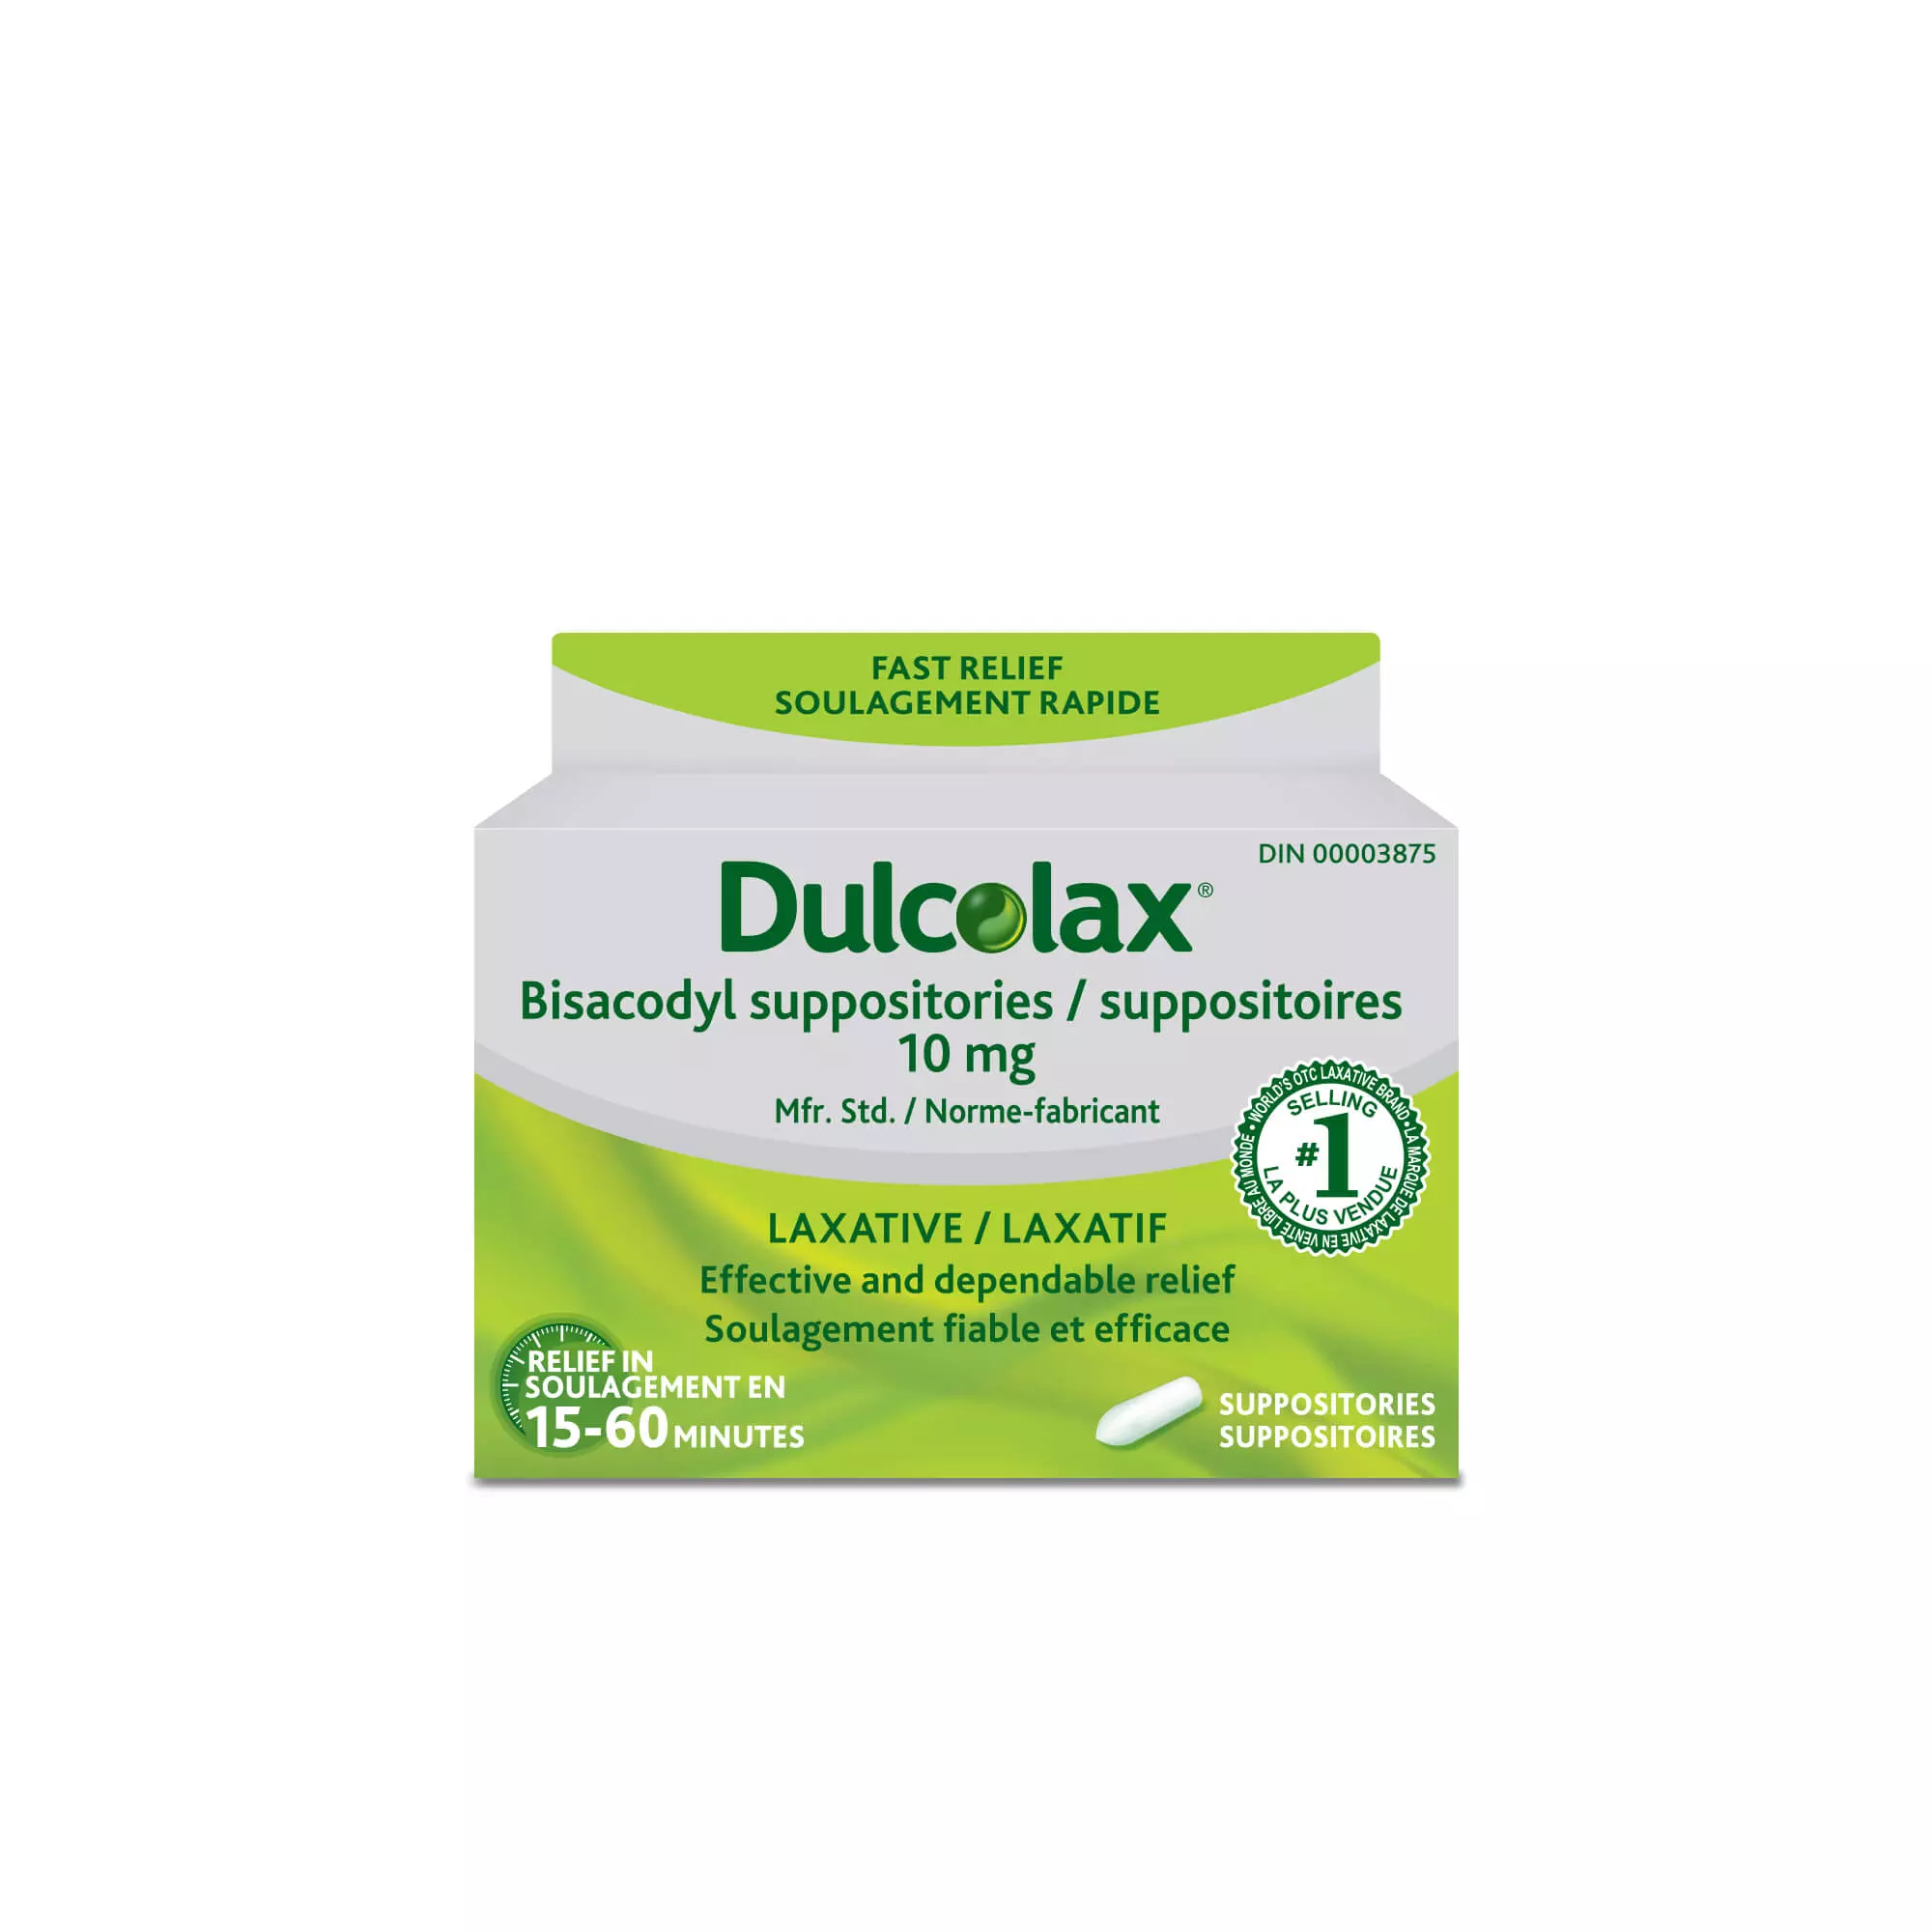 Dulcolax Medicated Laxative Suppositories, 4 ct